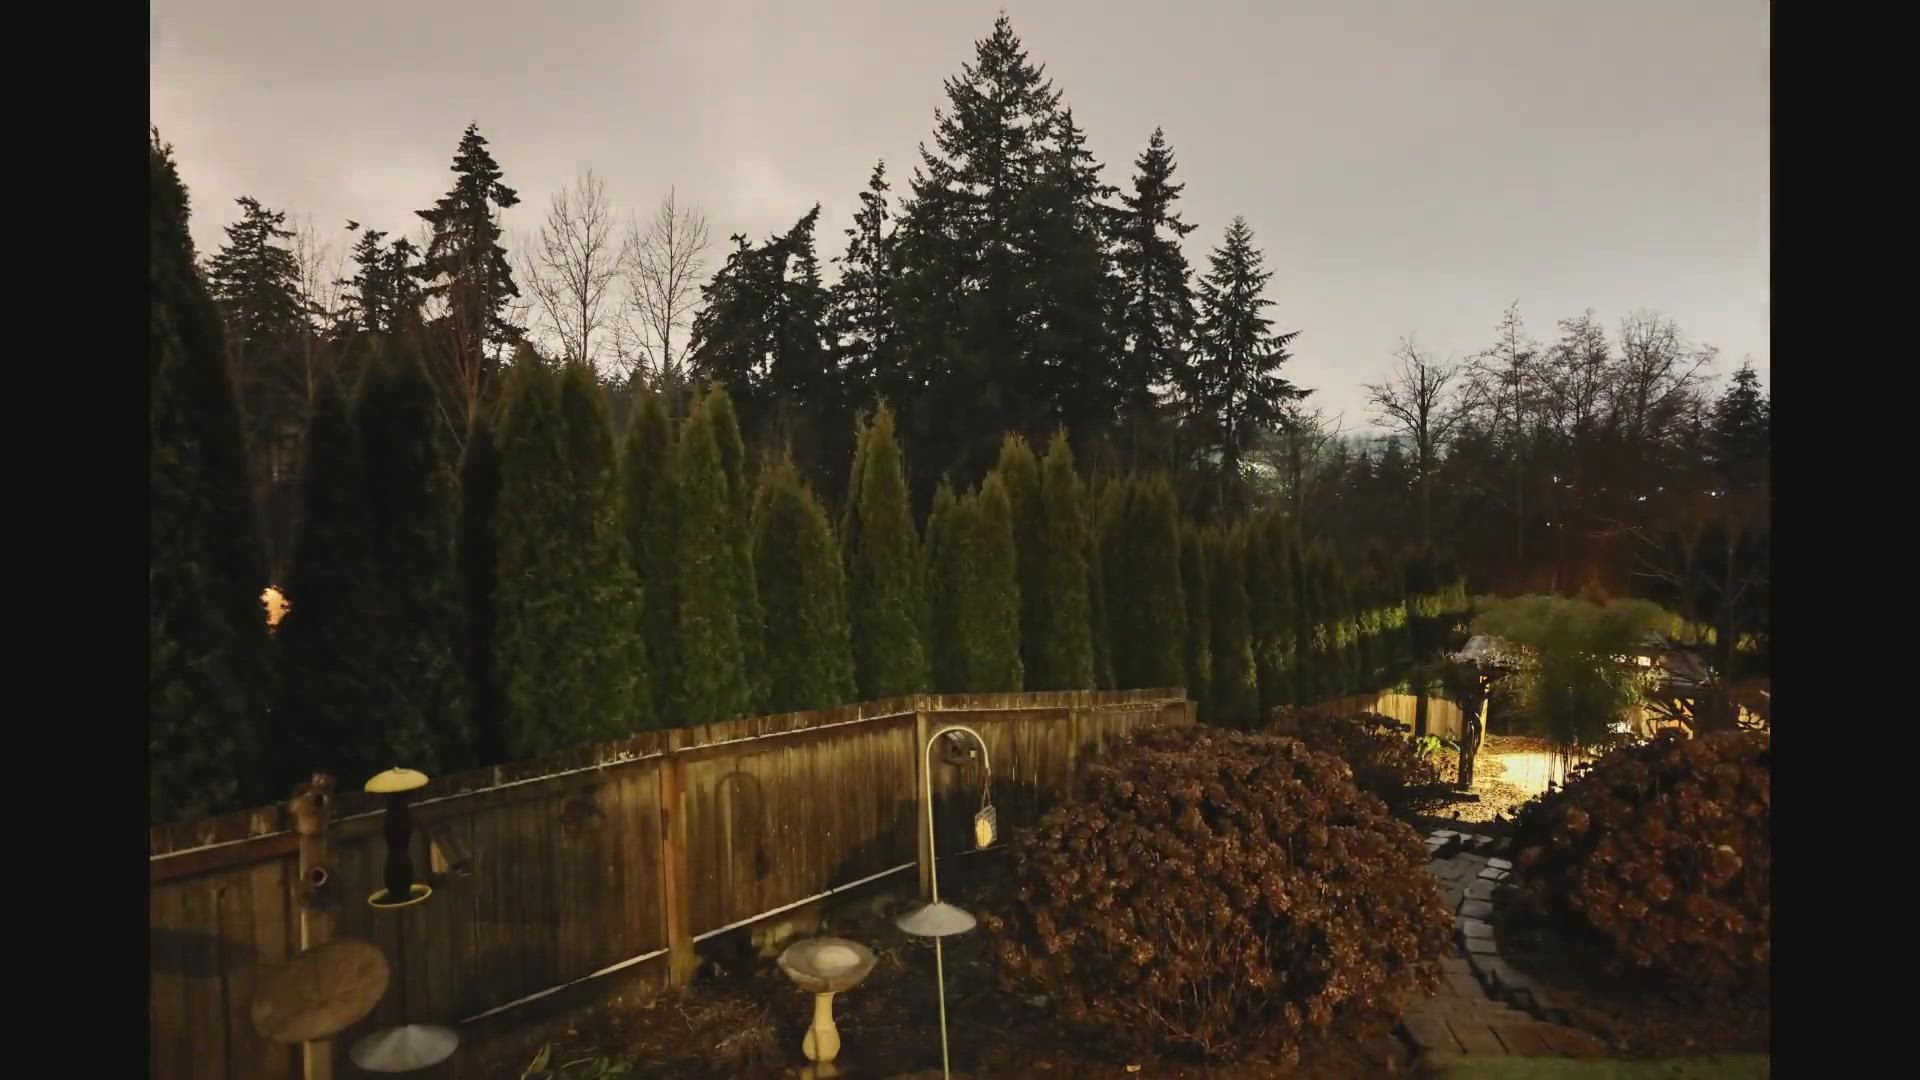 Timelapse over 32 hours in Federal Way shows how shrubs and branches on trees can bend and recover from the weight of ice.
Credit: Cliff Bolstad